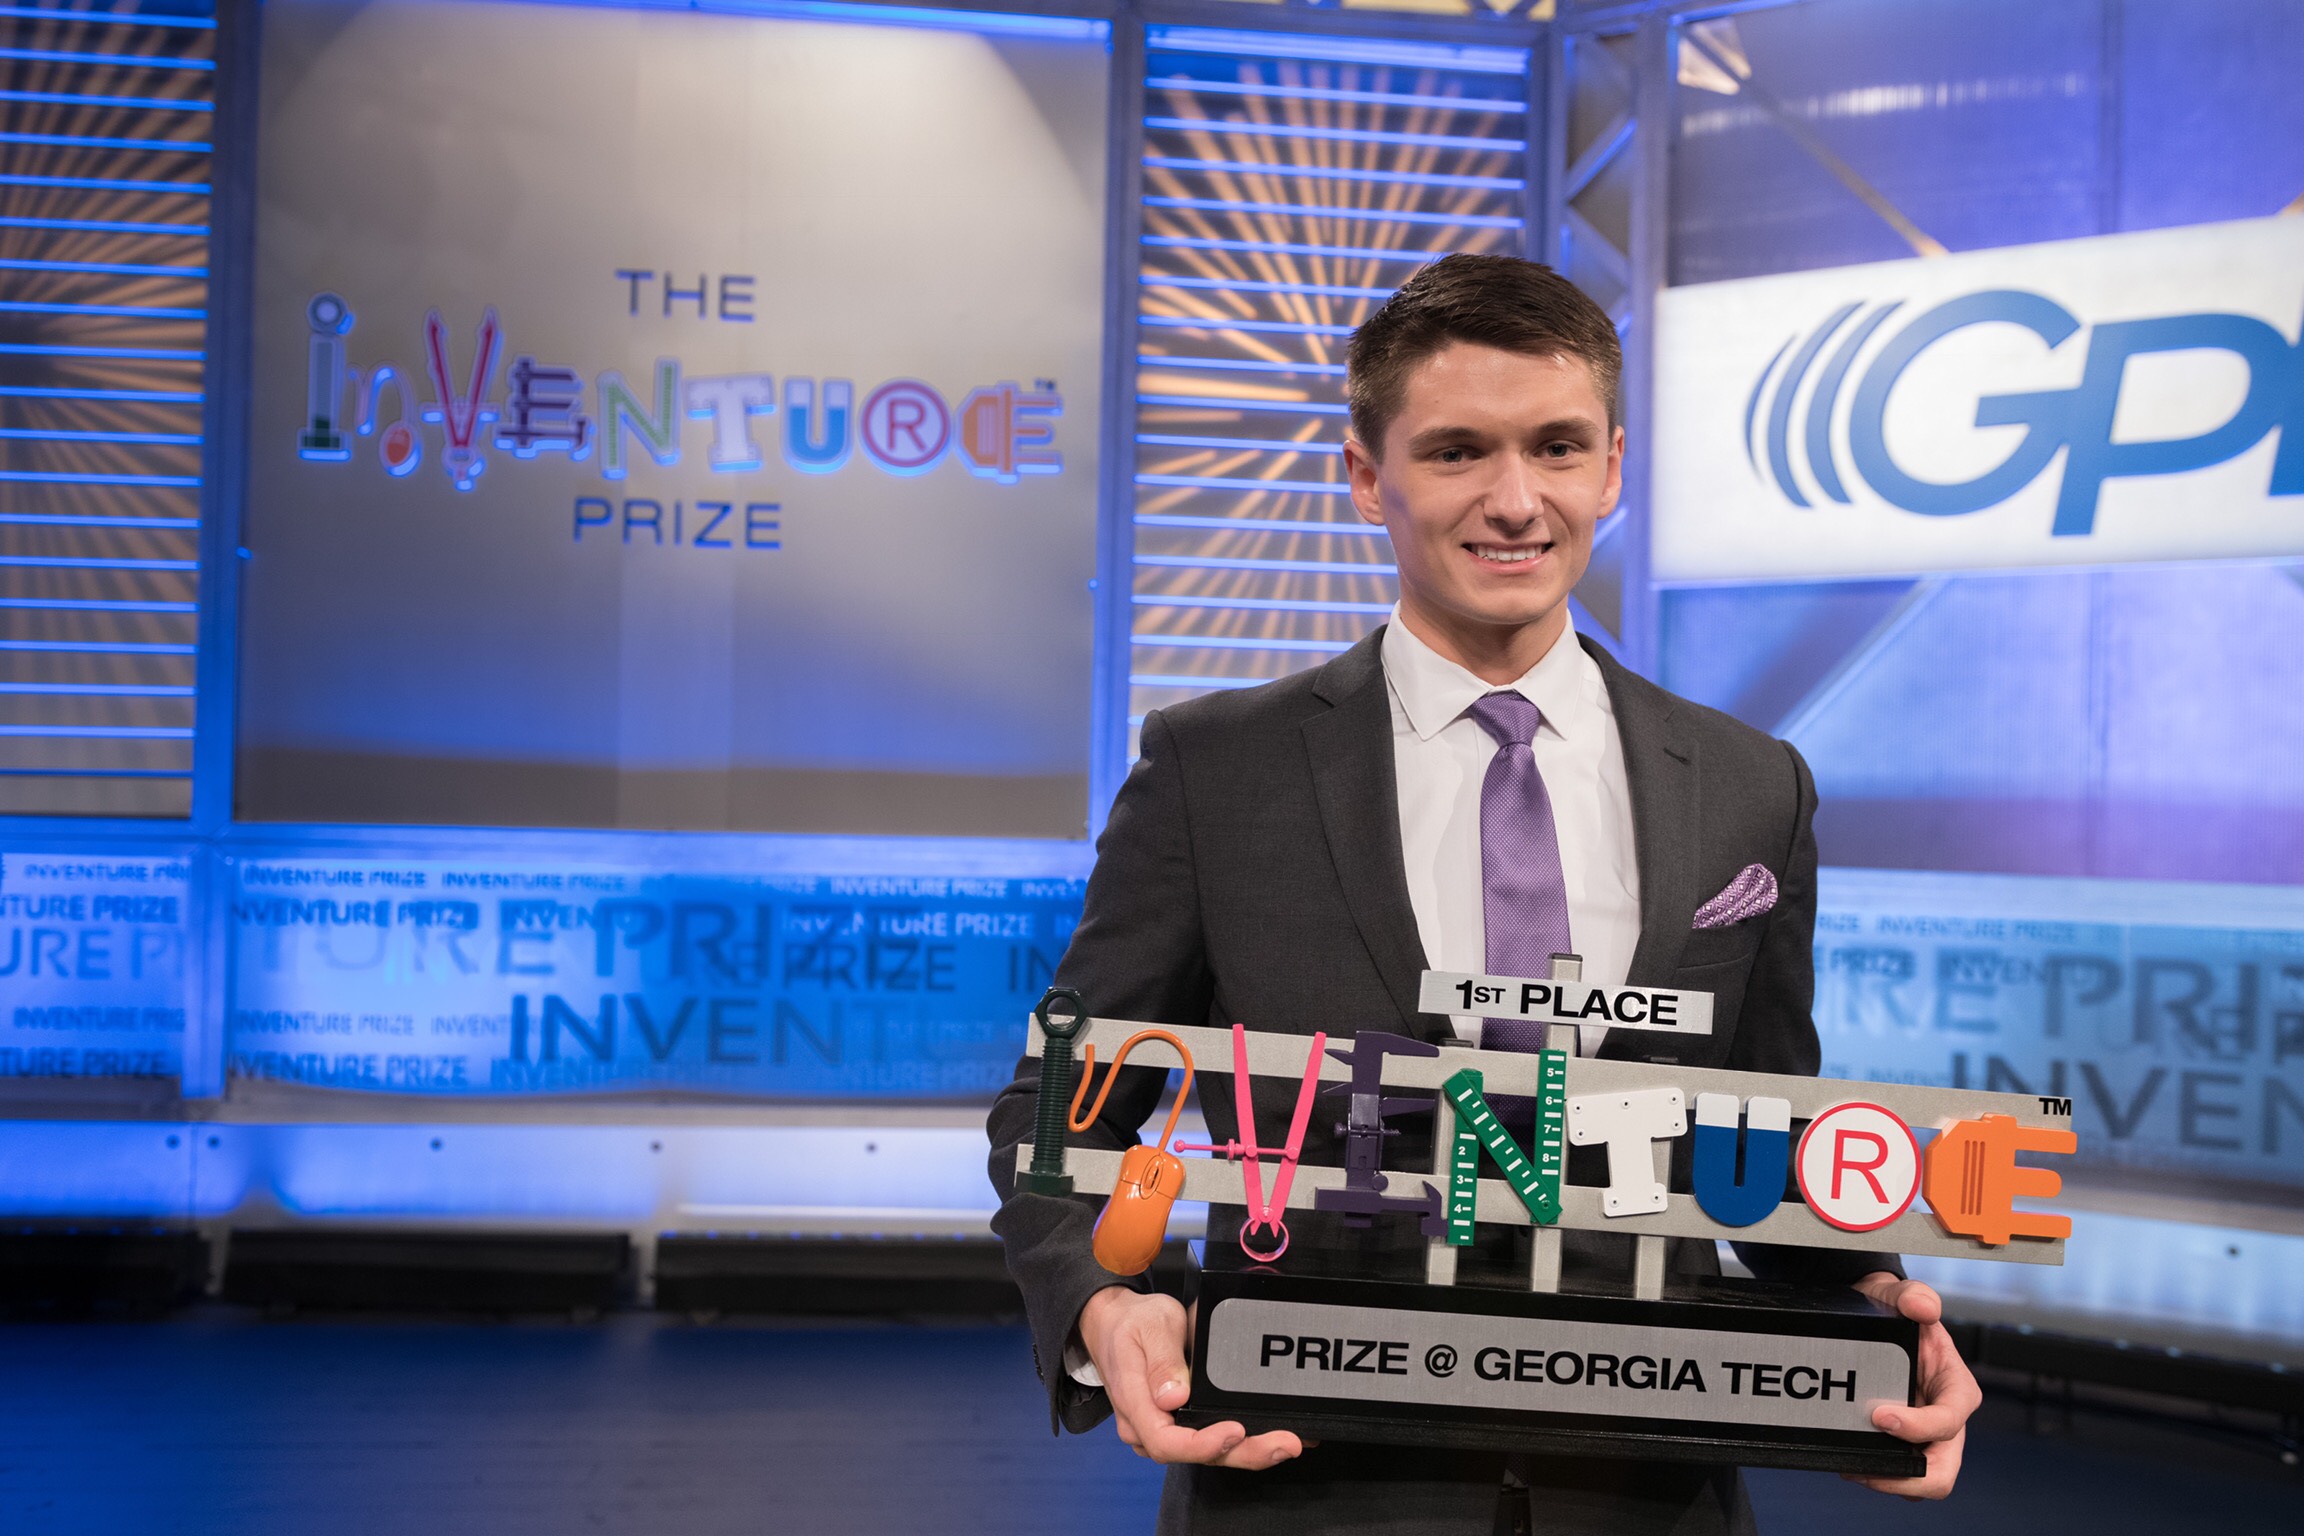 Kolby Hanley won the 2018 InVenture Prize and will received $20,000 and a free patent. Hanley, an archer, invented a new aiming device for competitive archery. (Photo: Allison Carter)